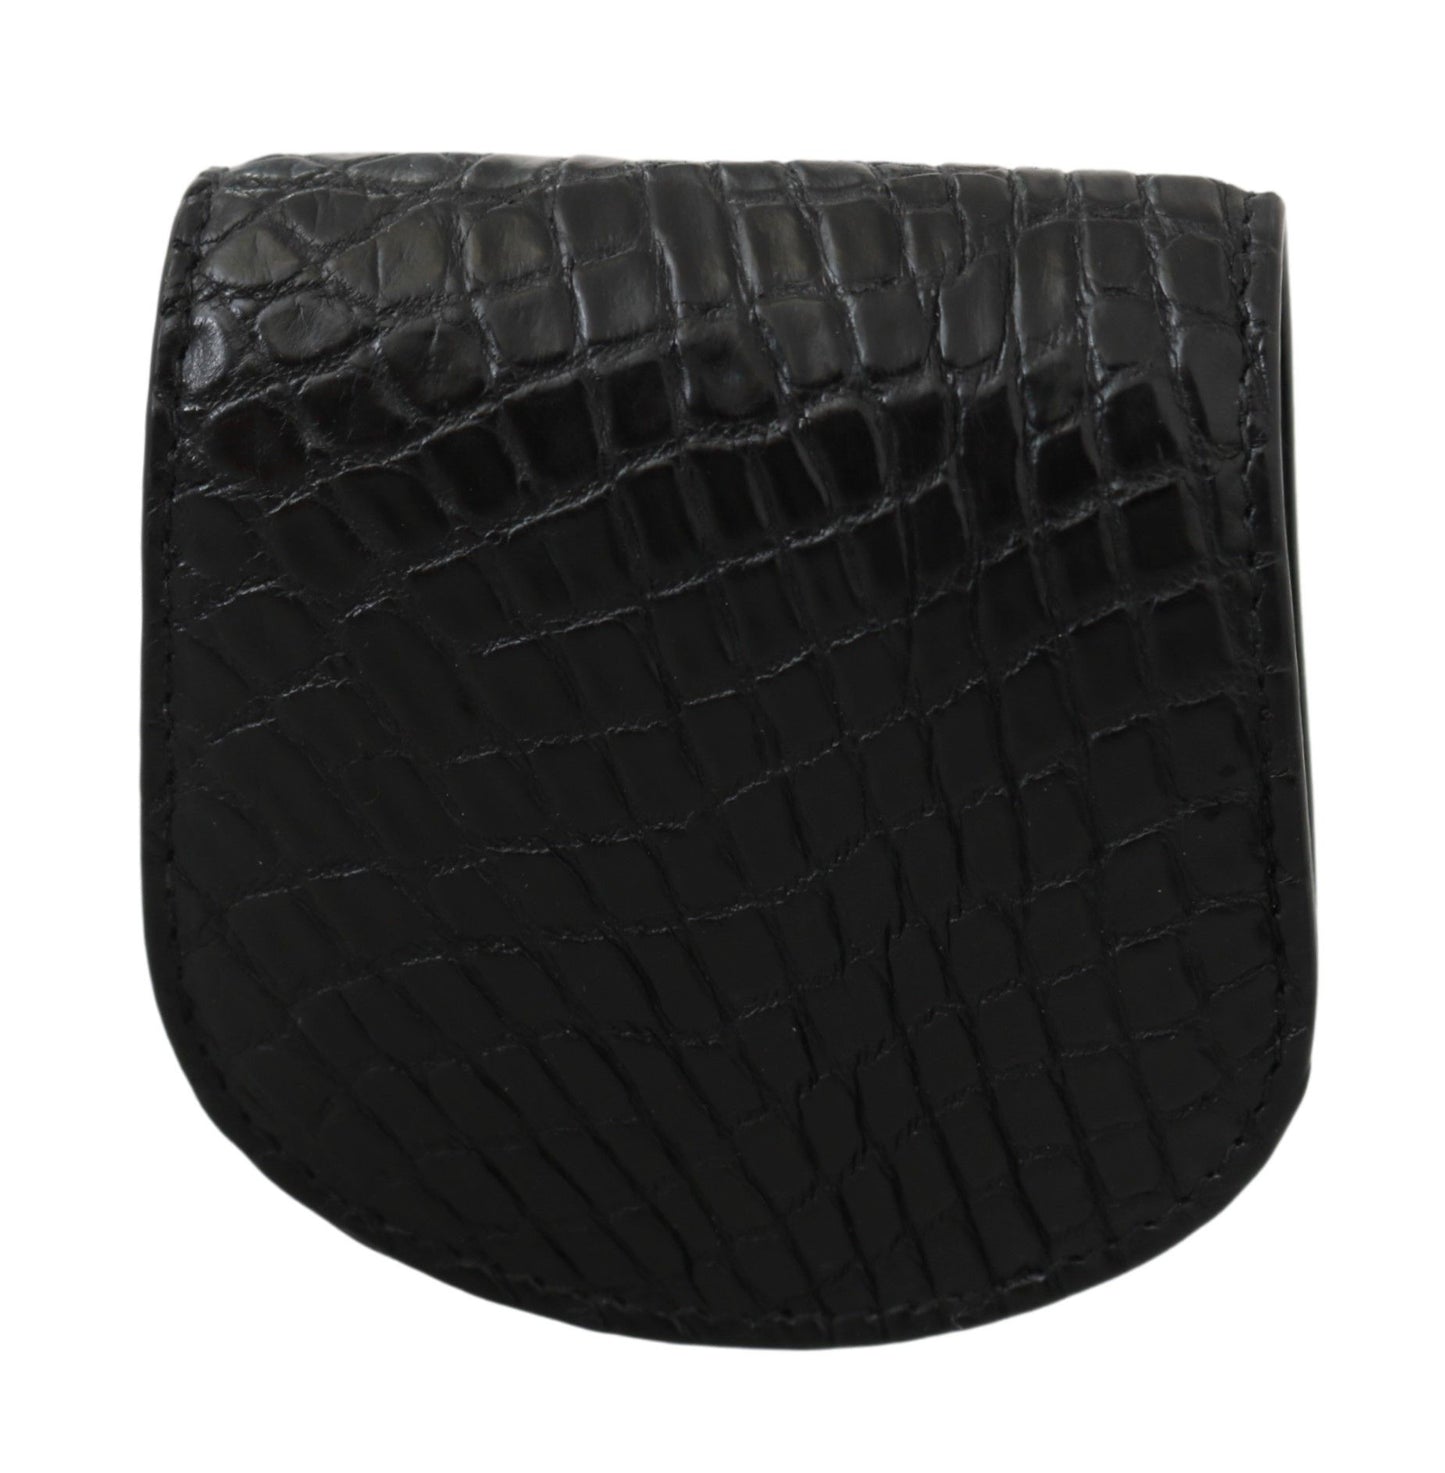 Black Exotic Skin Pocket Condom Case Holder - Designed by Dolce & Gabbana Available to Buy at a Discounted Price on Moon Behind The Hill Online Designer Discount Store